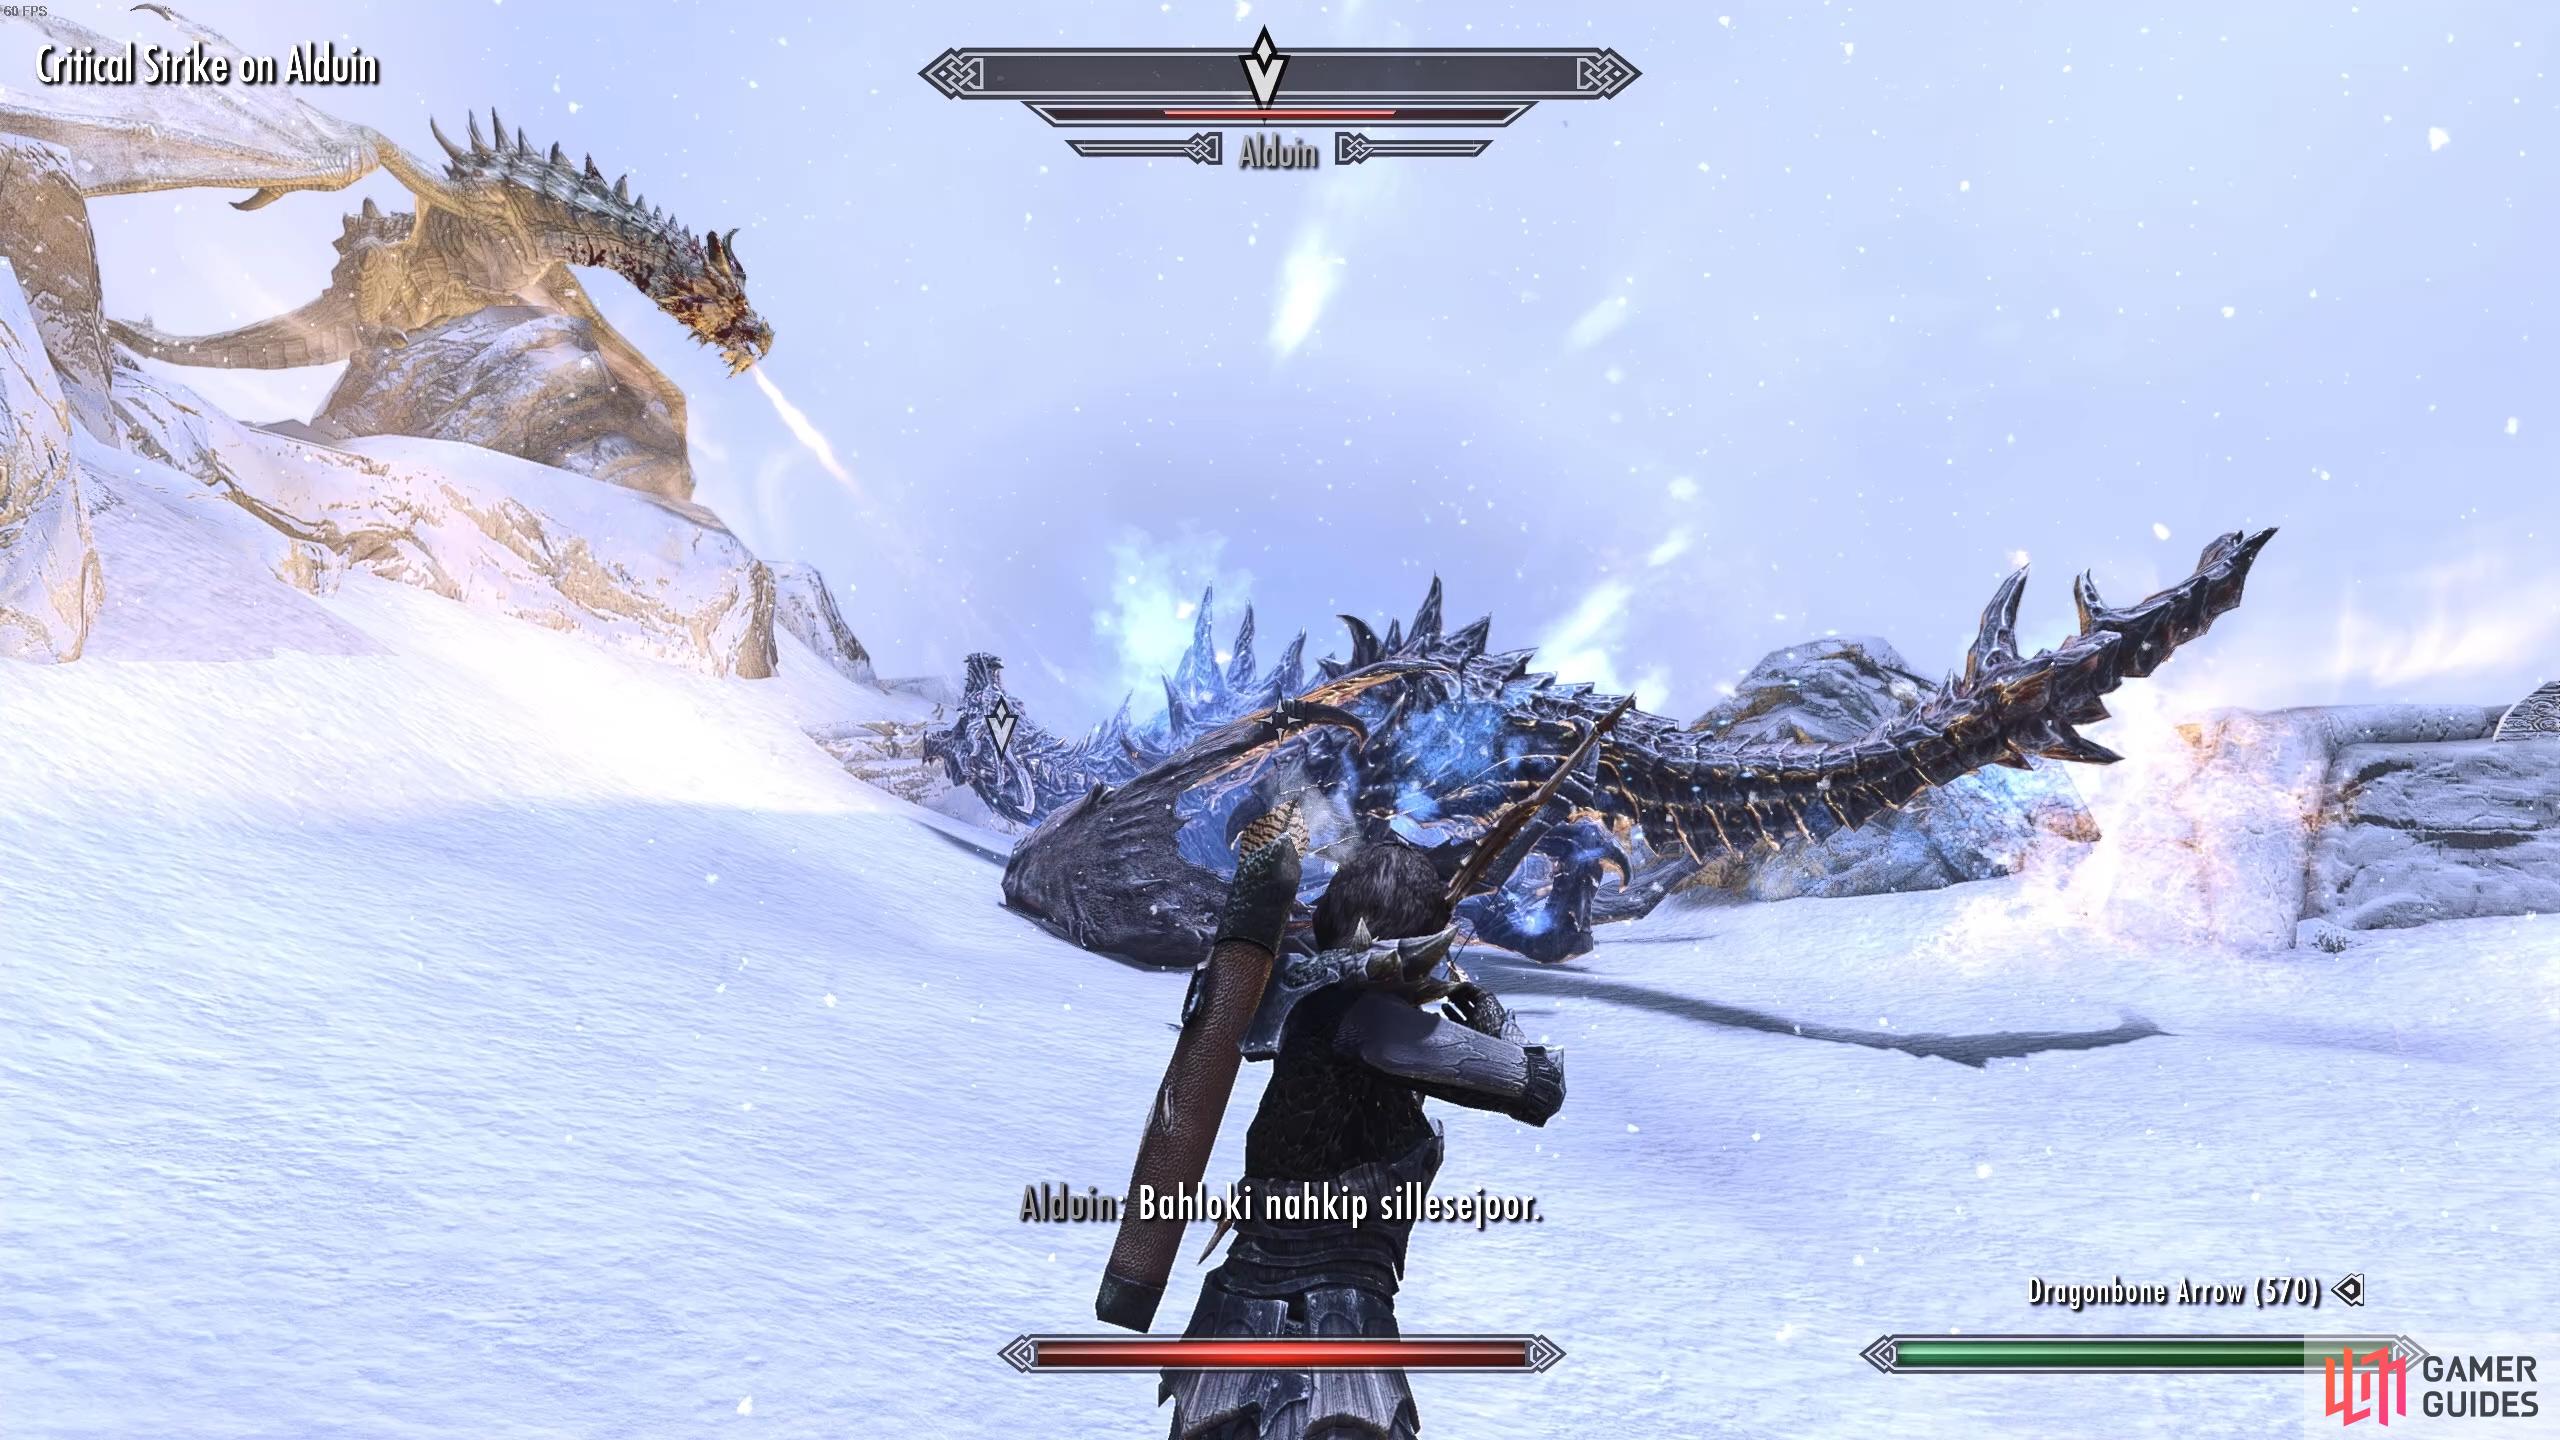 You can try to flank Alduin while he's fighting others to limit damage to yourself.